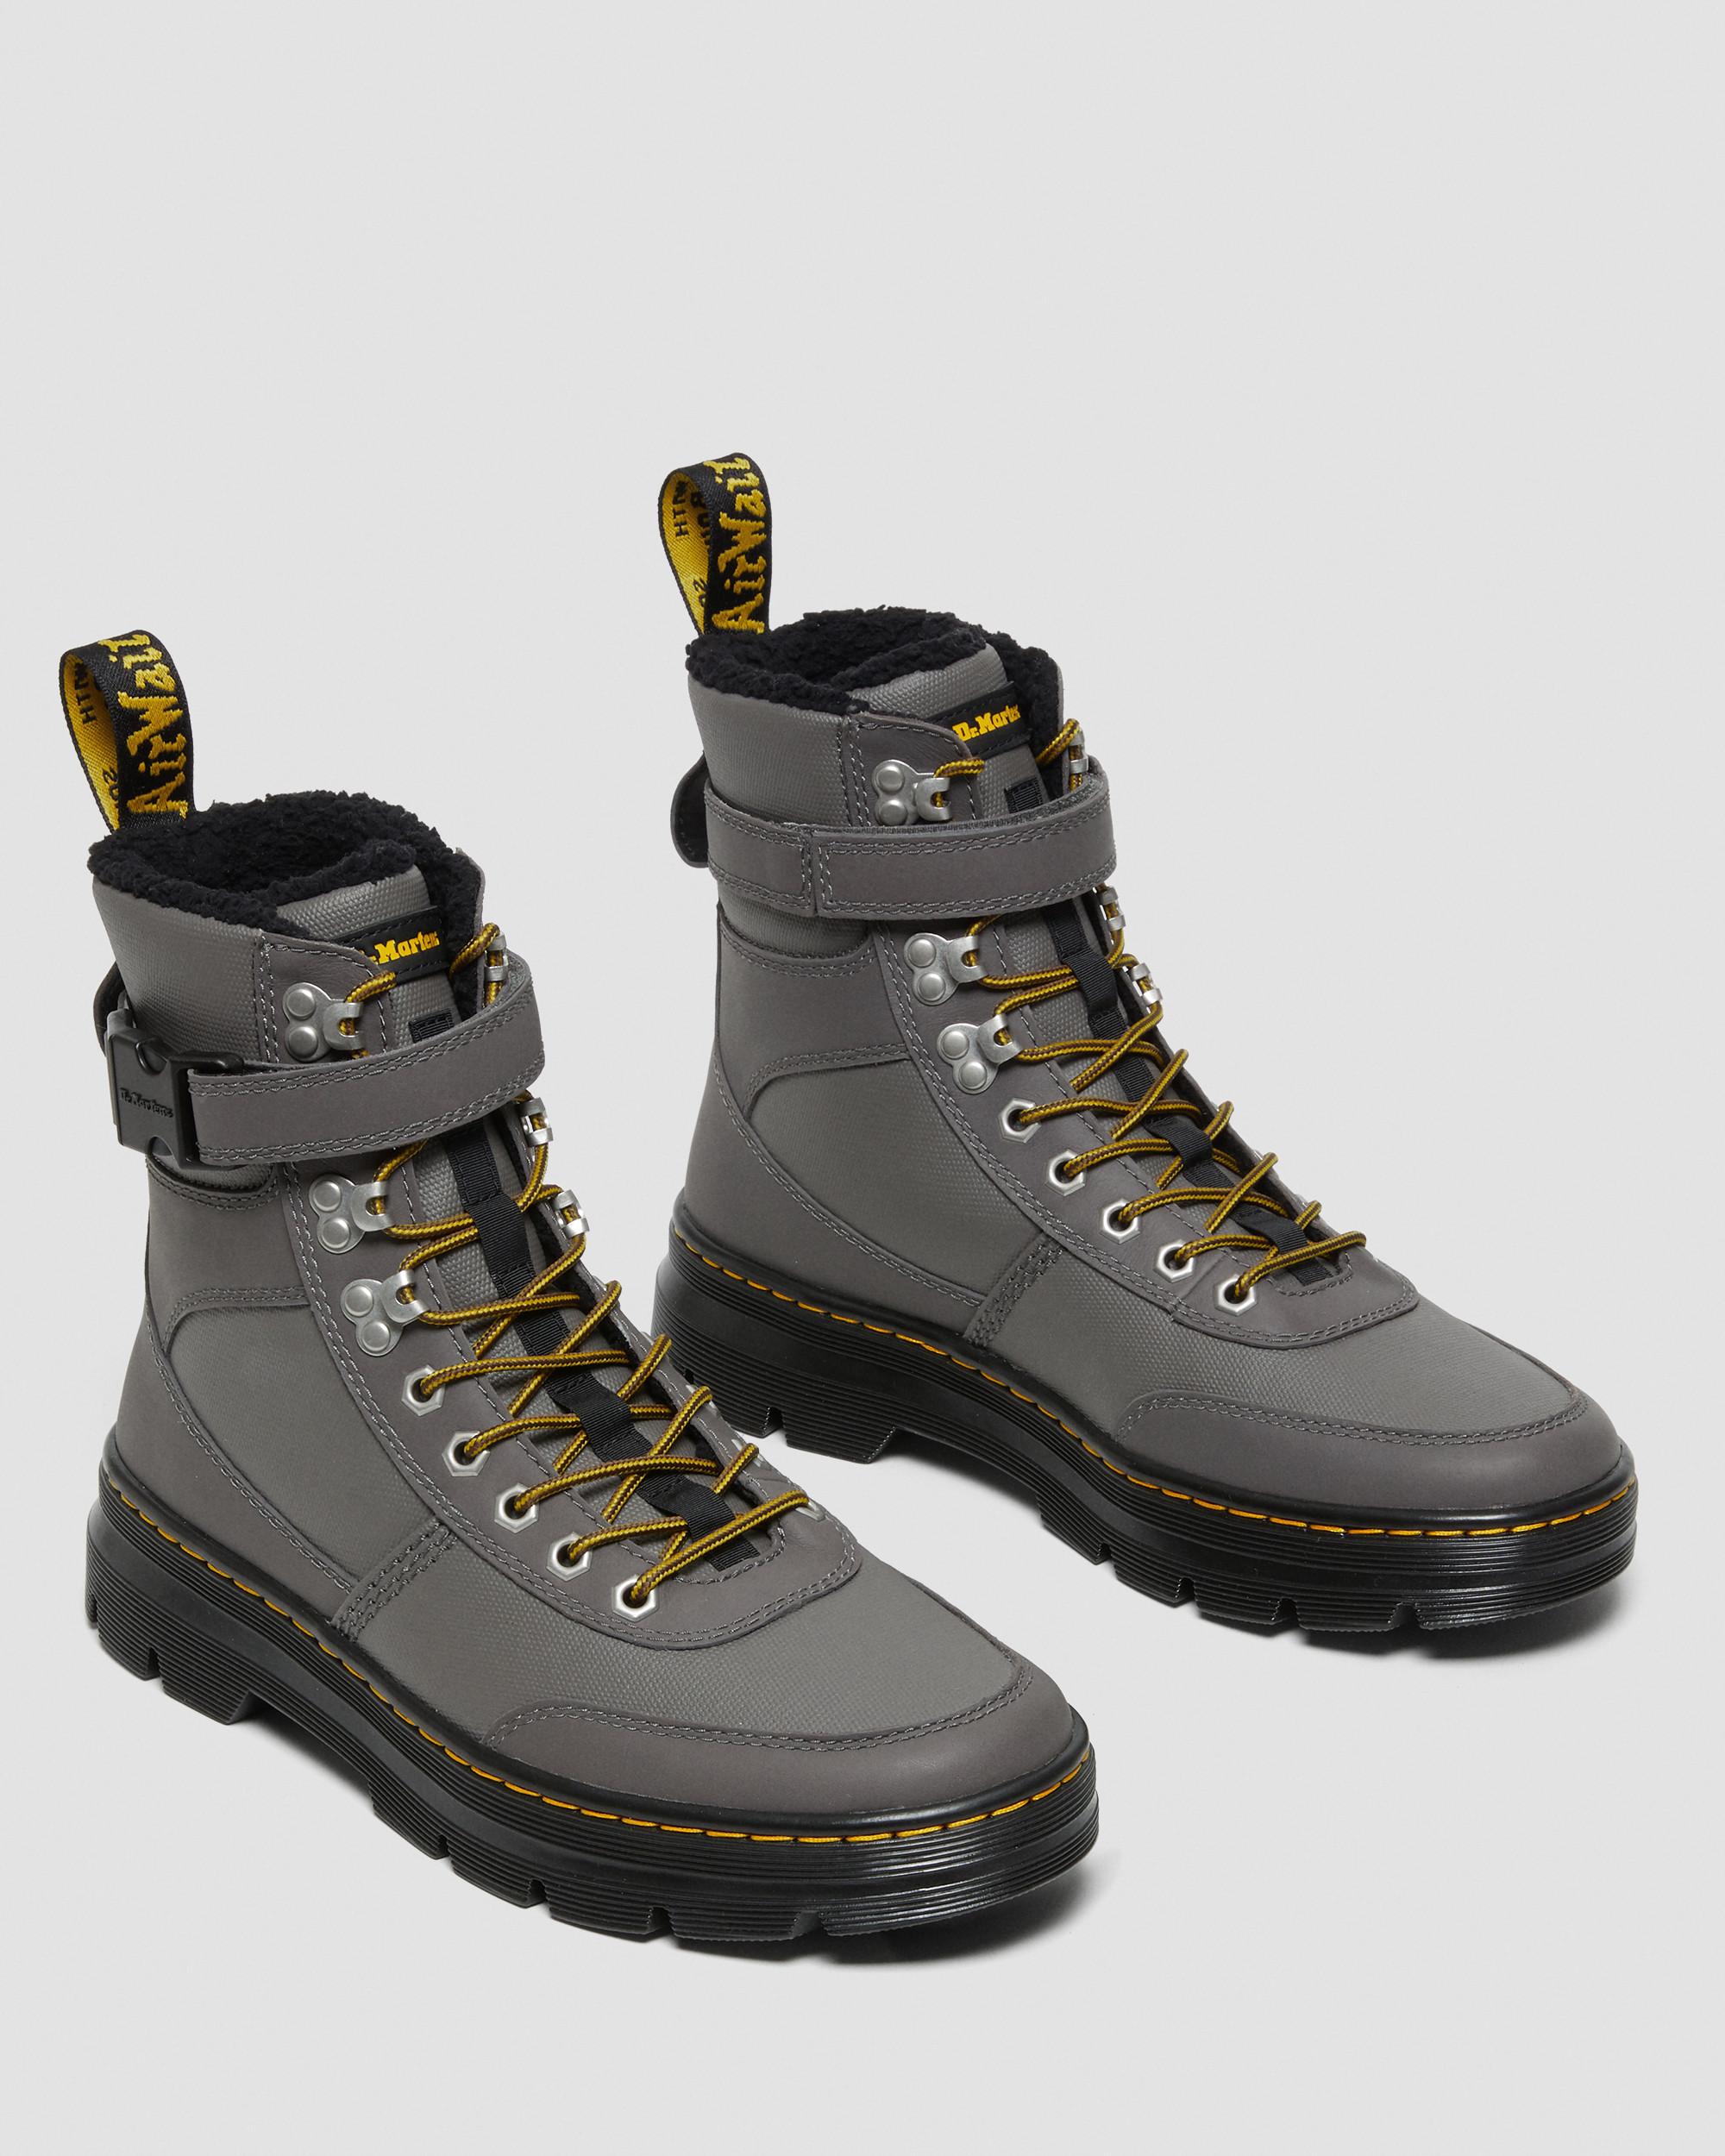 Combs Tech Utility Stiefel mit KunstfellfutterCombs Tech Utility Stiefel Mit Kunstfellfutter Dr. Martens